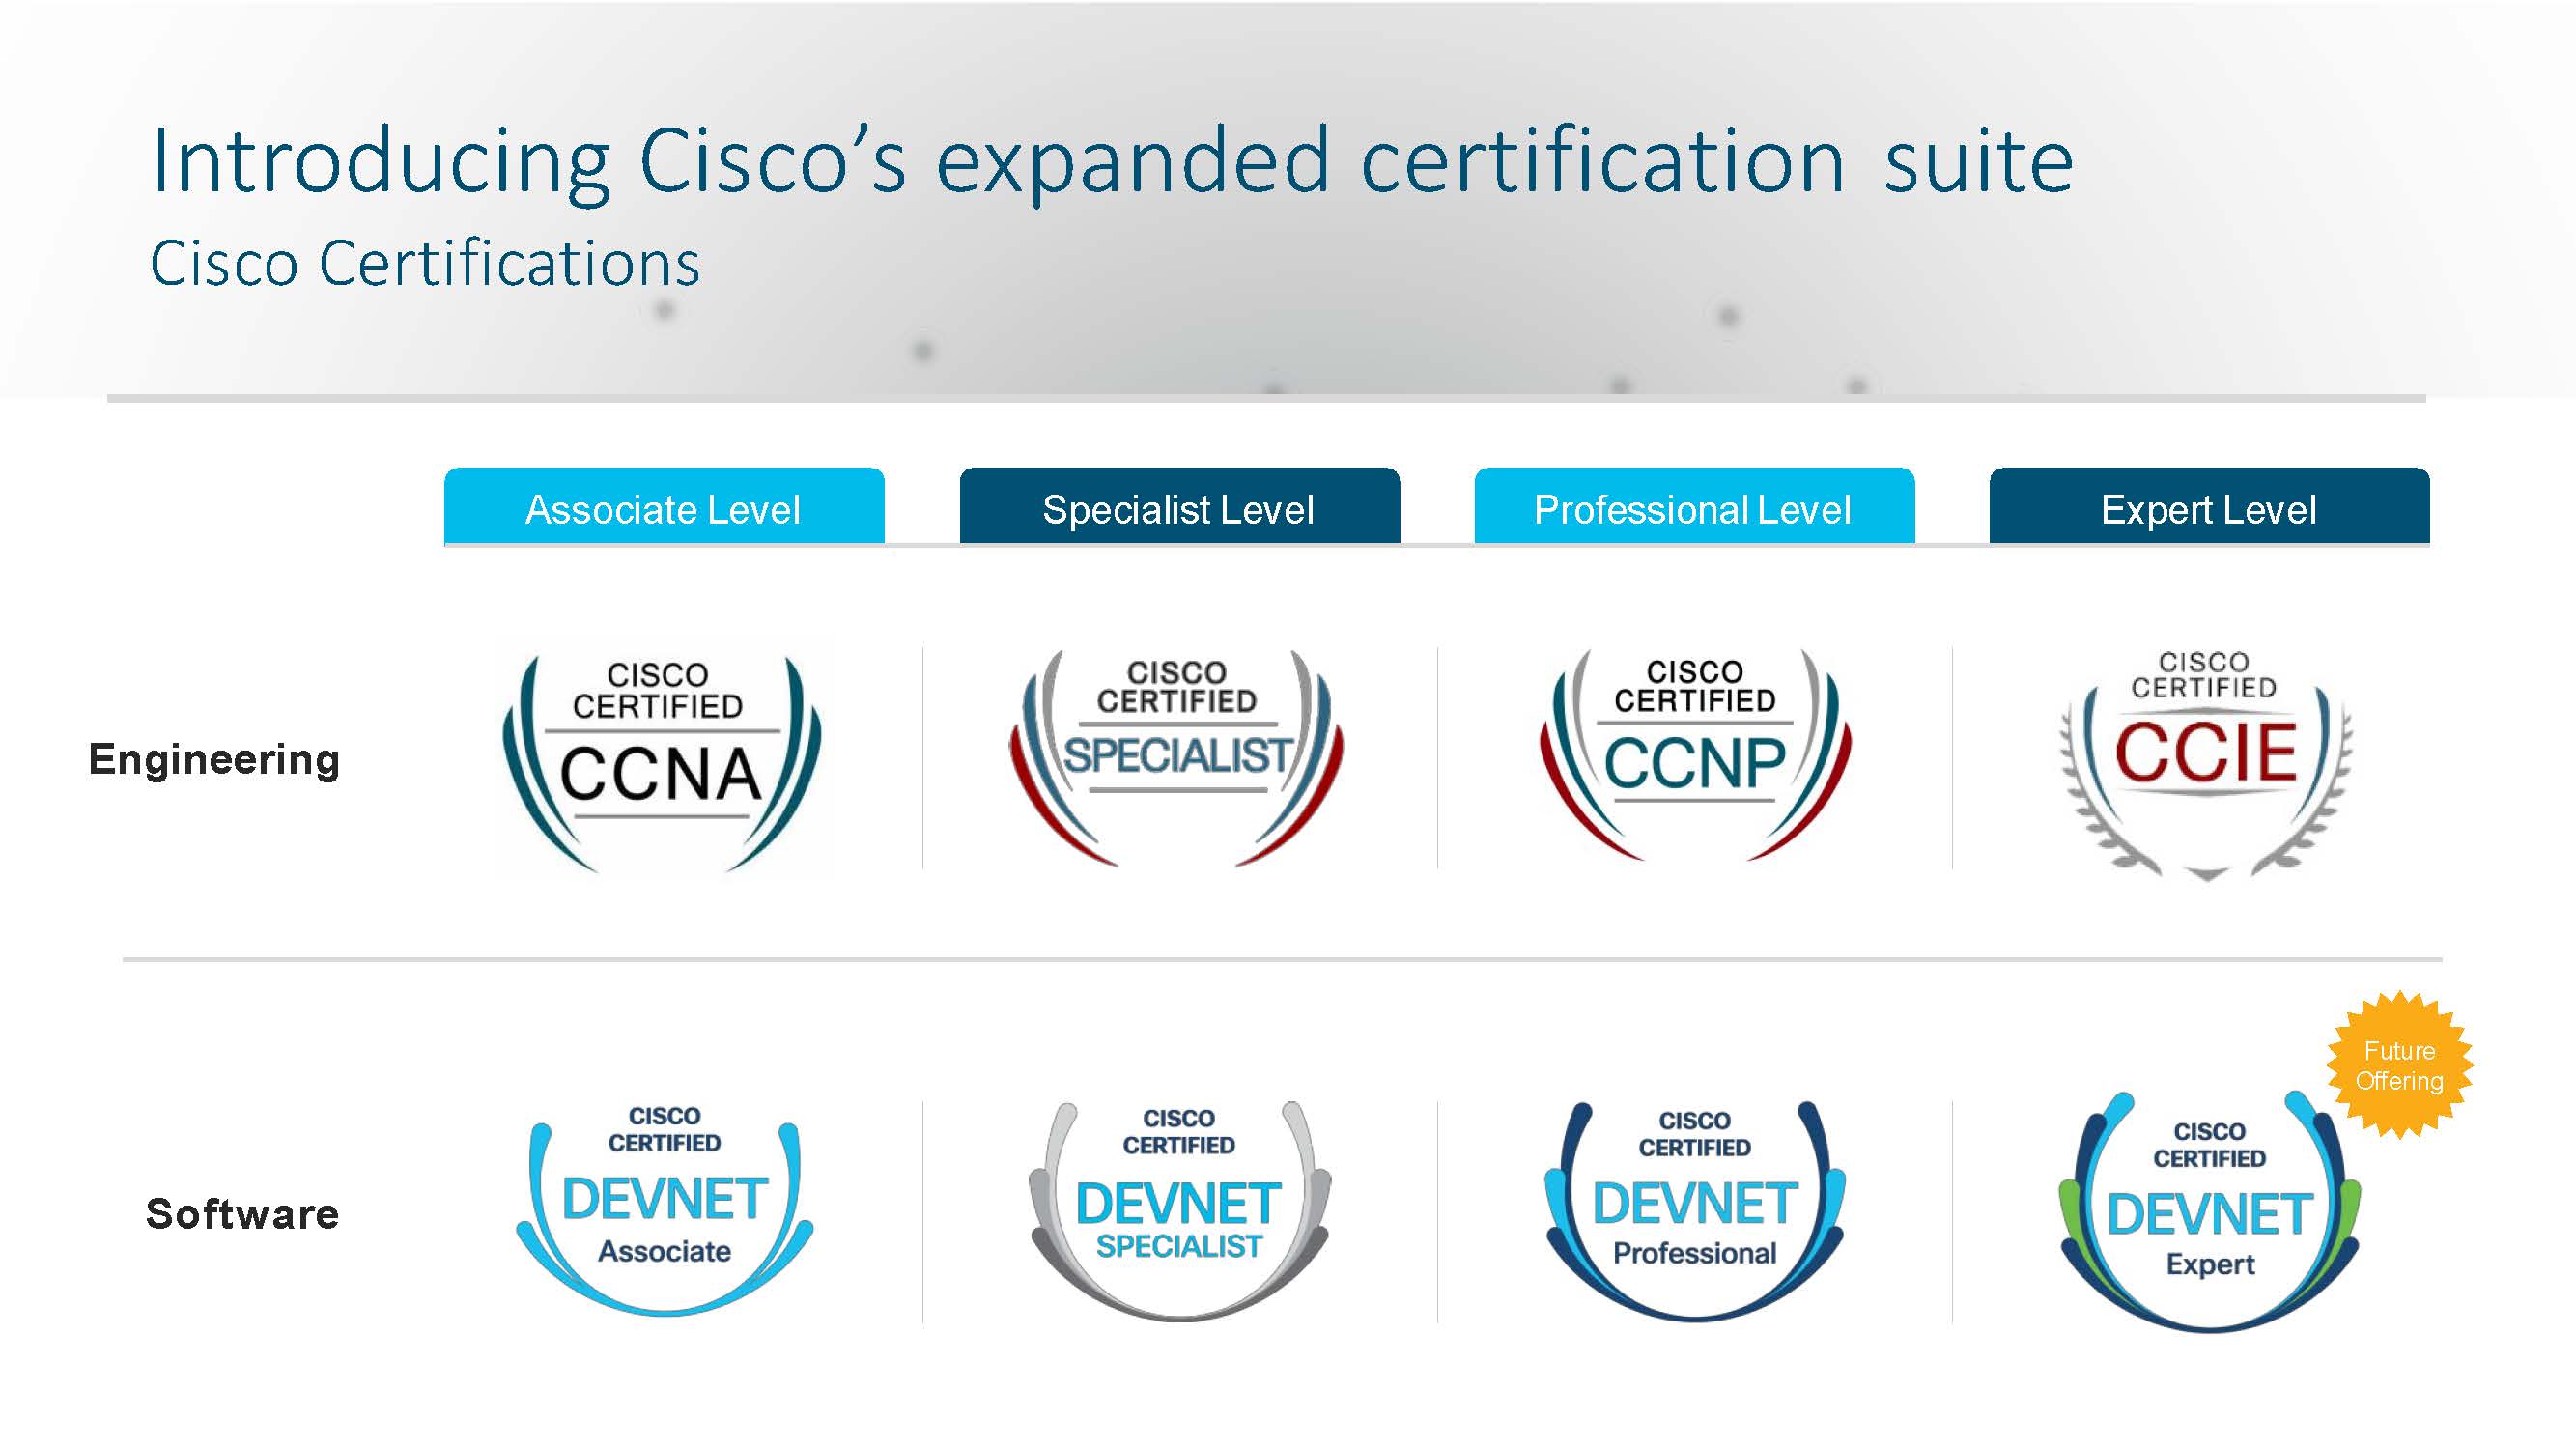 New Cisco Training and Certification Updates are Announced | Global Knowledge